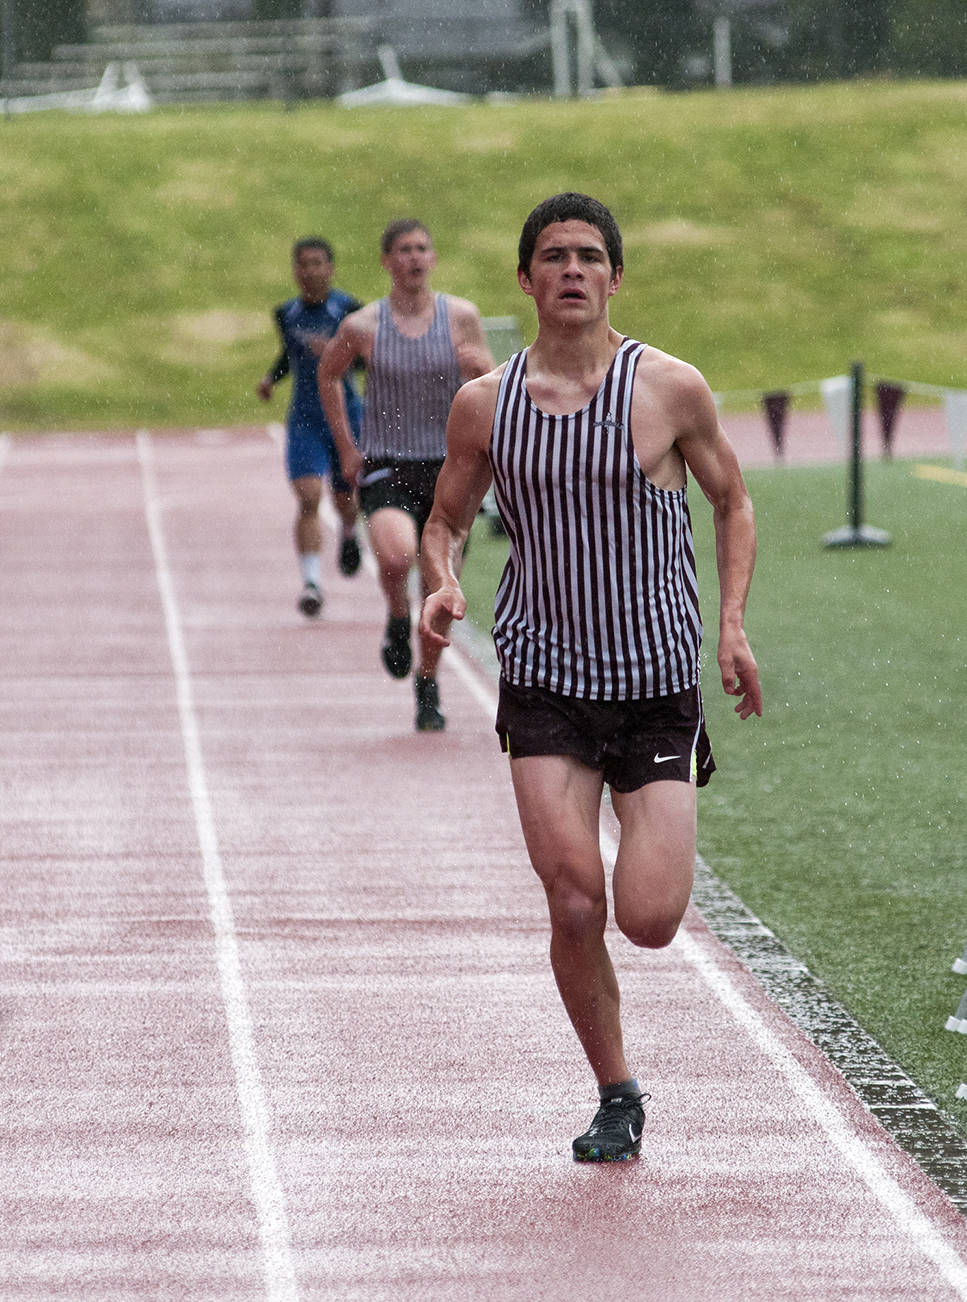 (Brendan Carl | Grays Harbor Newspaper Group) Montesano’s Jake Mustard won the 1,600 and 3,200 at the Evergreen 1A League championships on Friday.